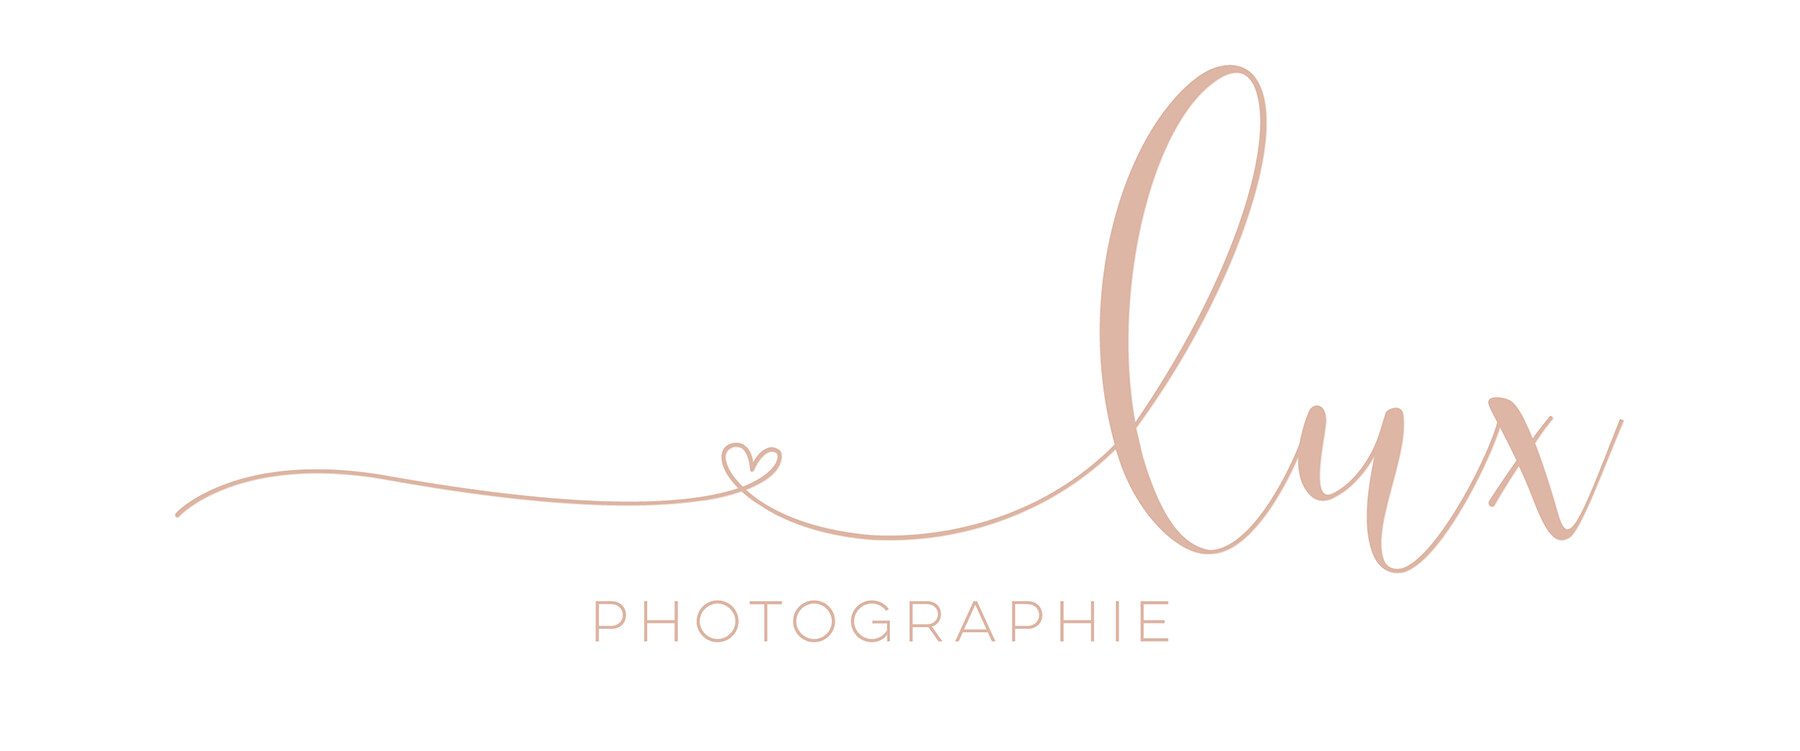 Lux Photography Logo